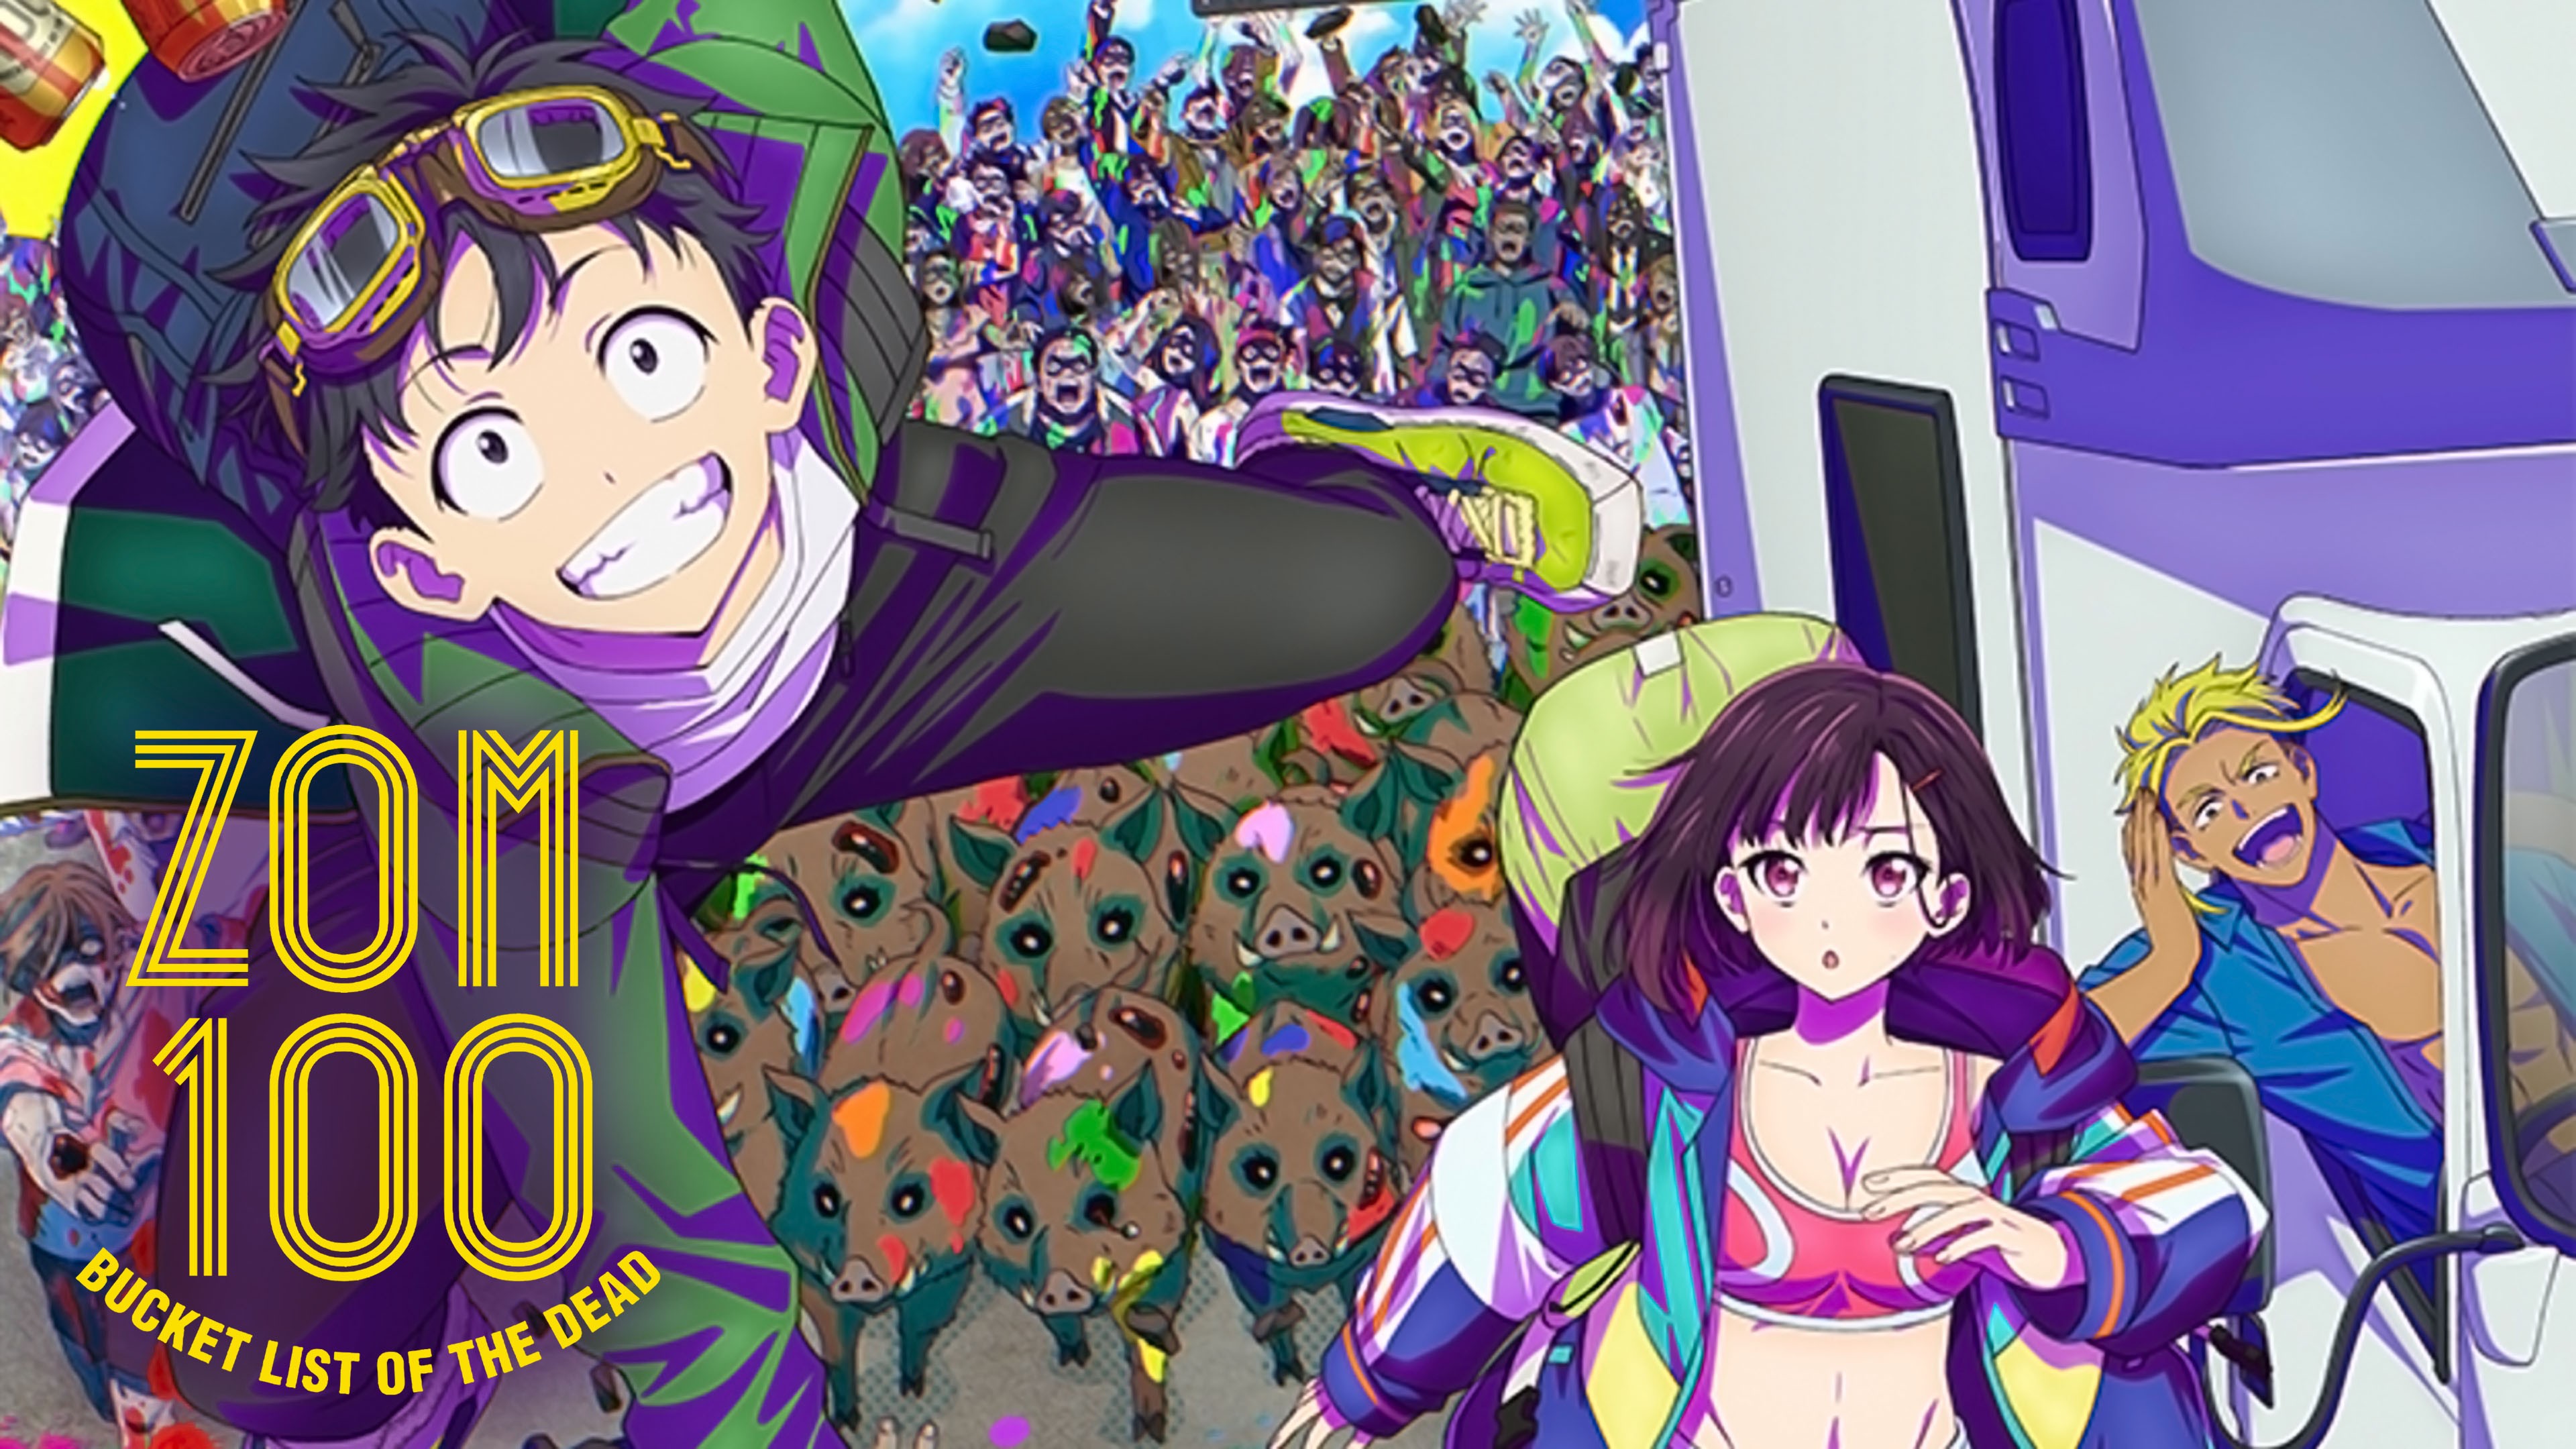 The Best Zombie Anime Recommendations